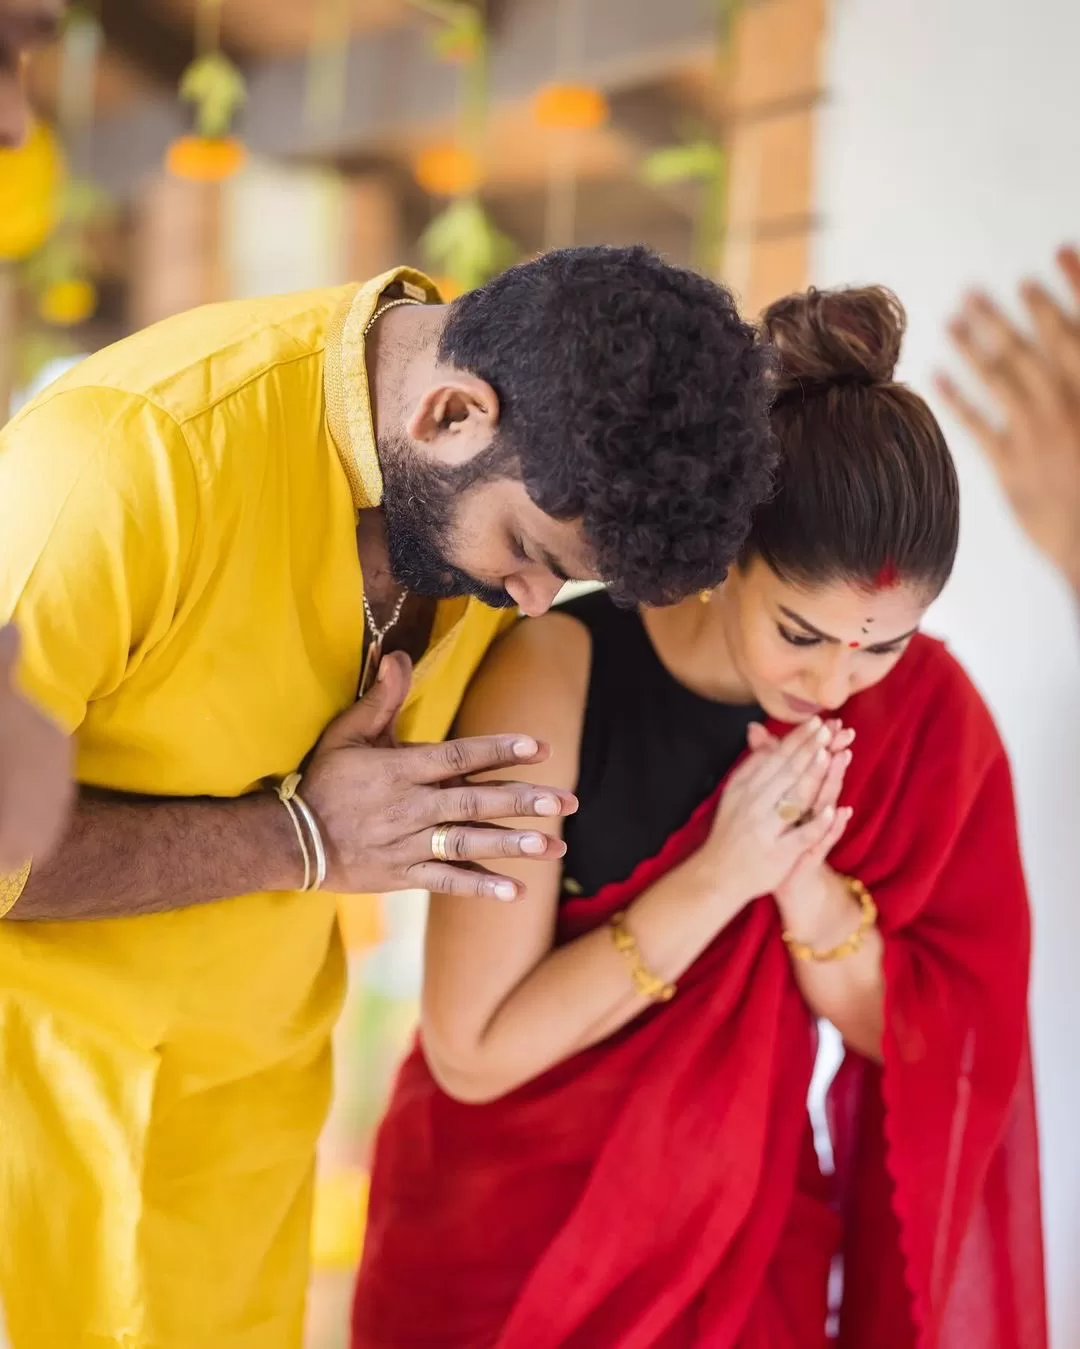 South Actress Nayanthara and Vignesh Shivan's Candid Moment Breaks the Internet: 